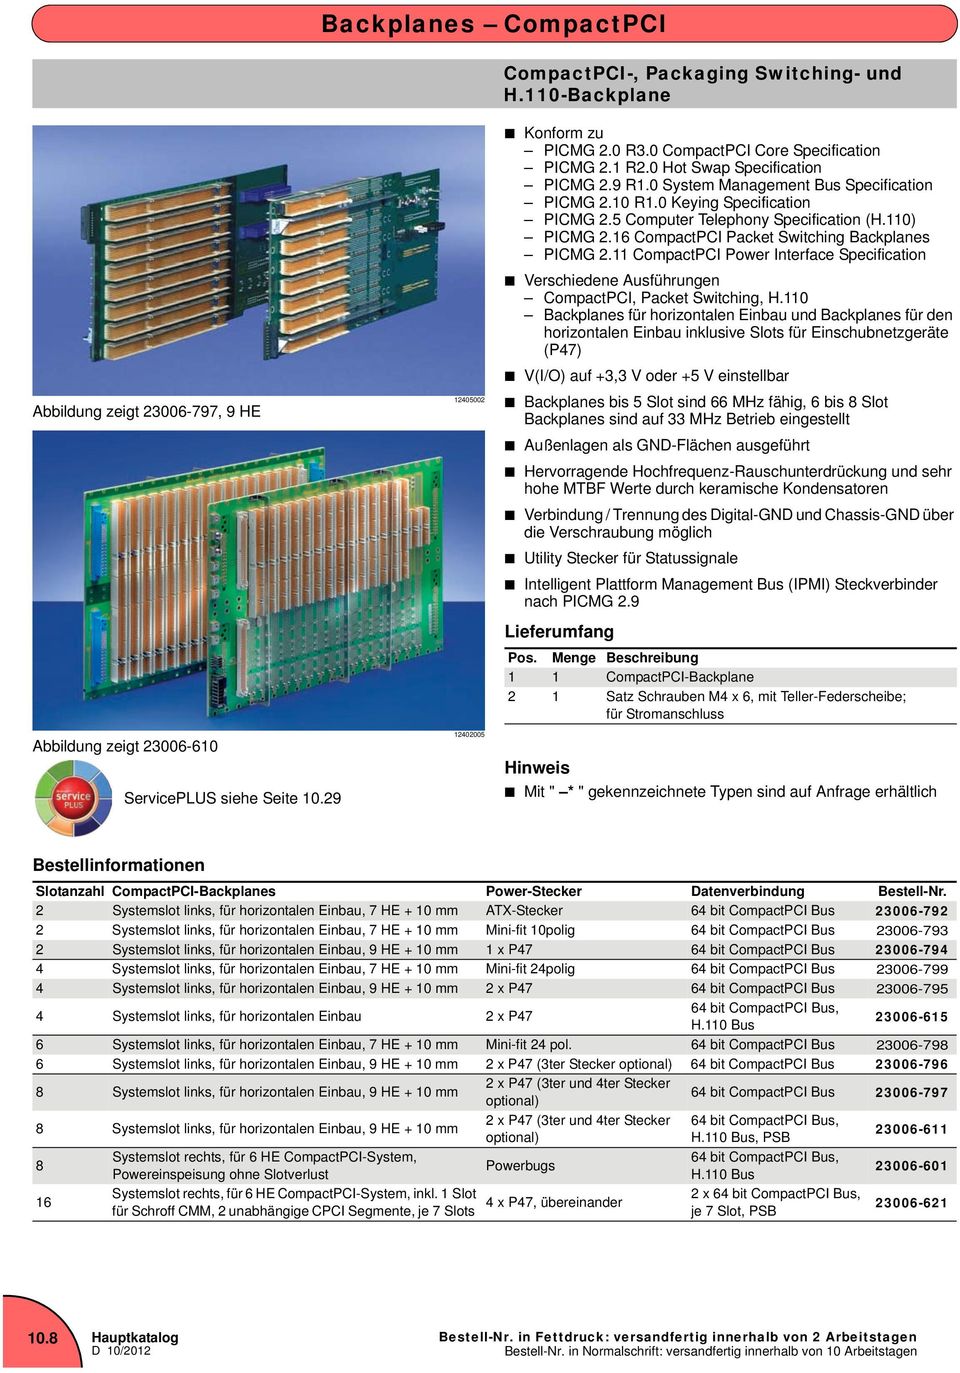 5 Computer Telephony Specification (H.110) PICMG 2.16 CompactPCI Packet Switching Backplanes PICMG 2.